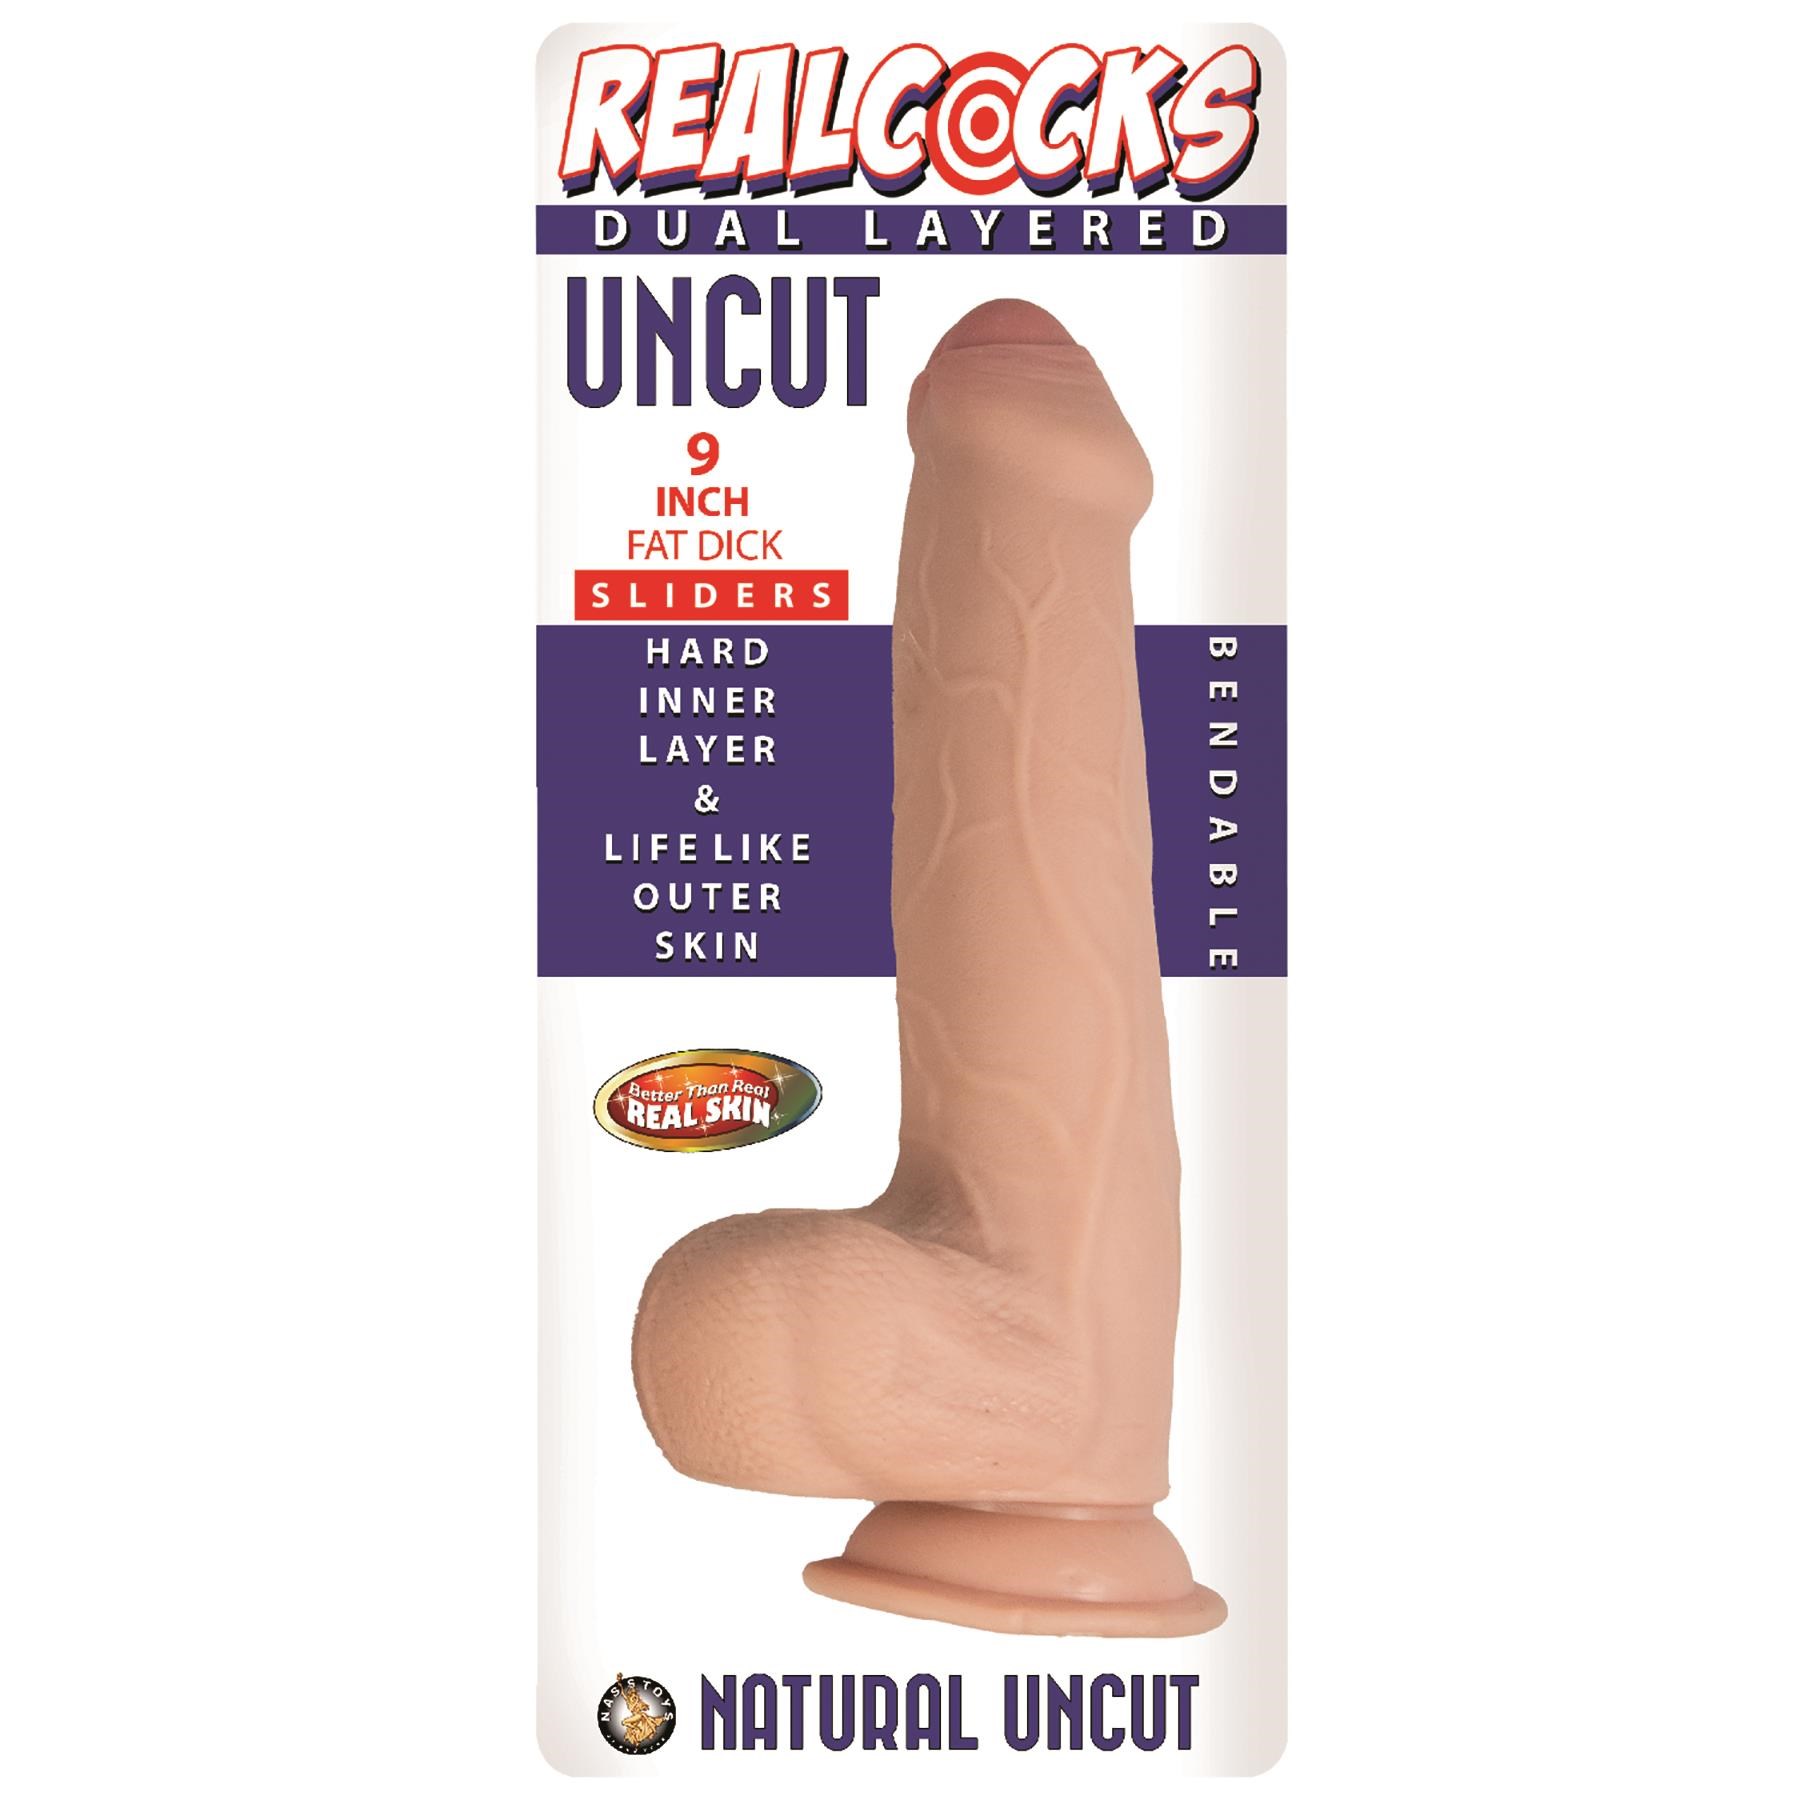 Realcocks 9 Inch Fat Dick Dual Layered Uncut Sliders Dildo - Packaging - White